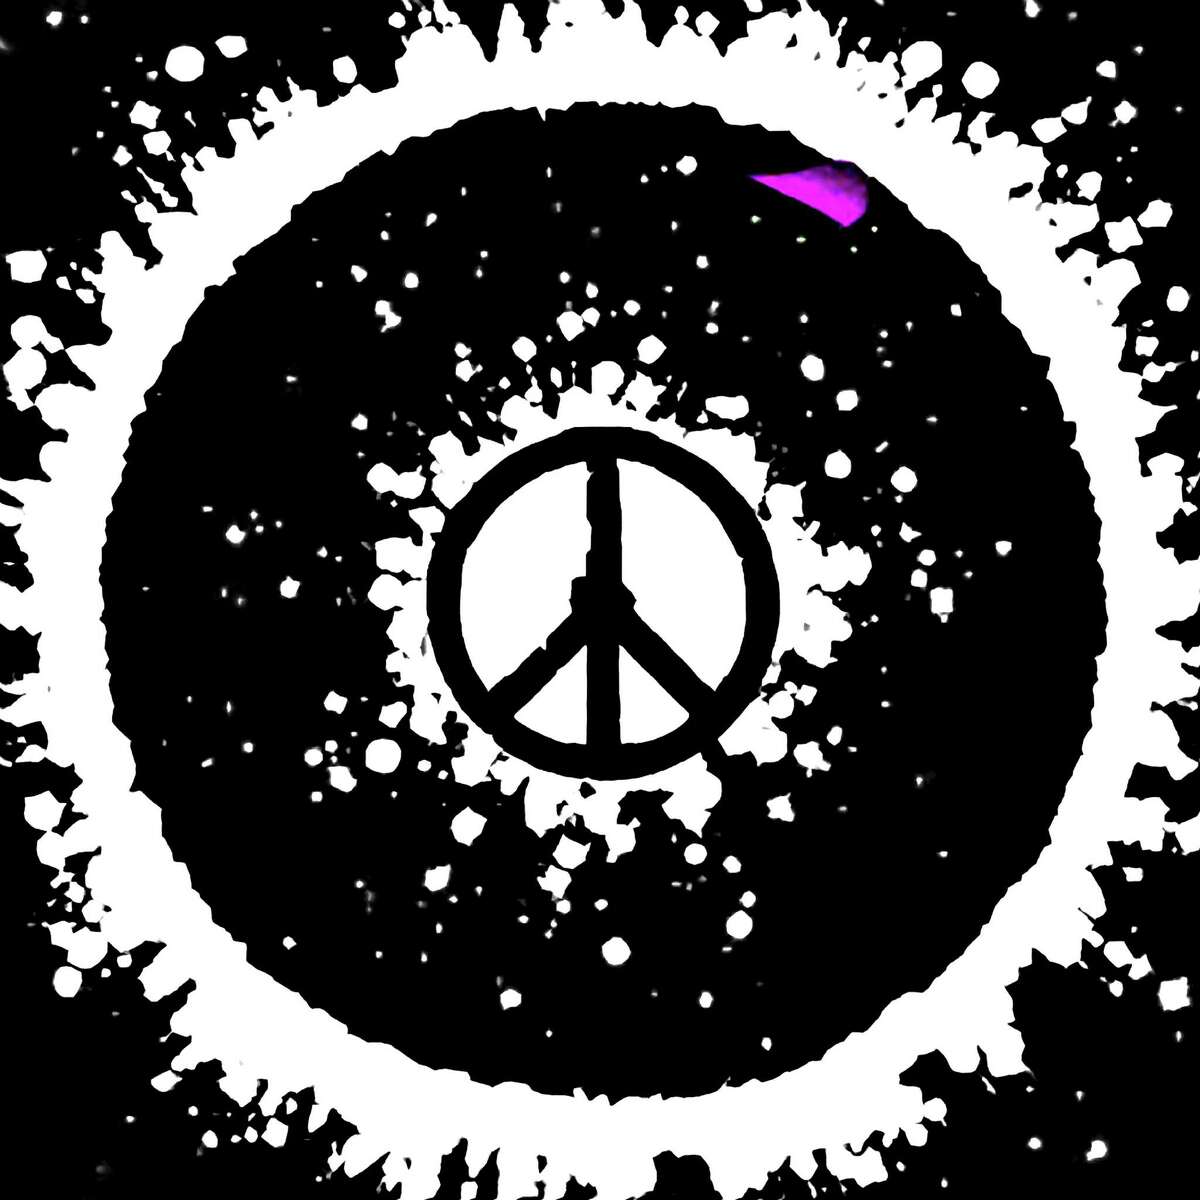 Beatles drummer Ringo Starr’s work tends to be rooted in the pop-art aesthetic, such as this black-and-white peace sign print he created in 2012. 